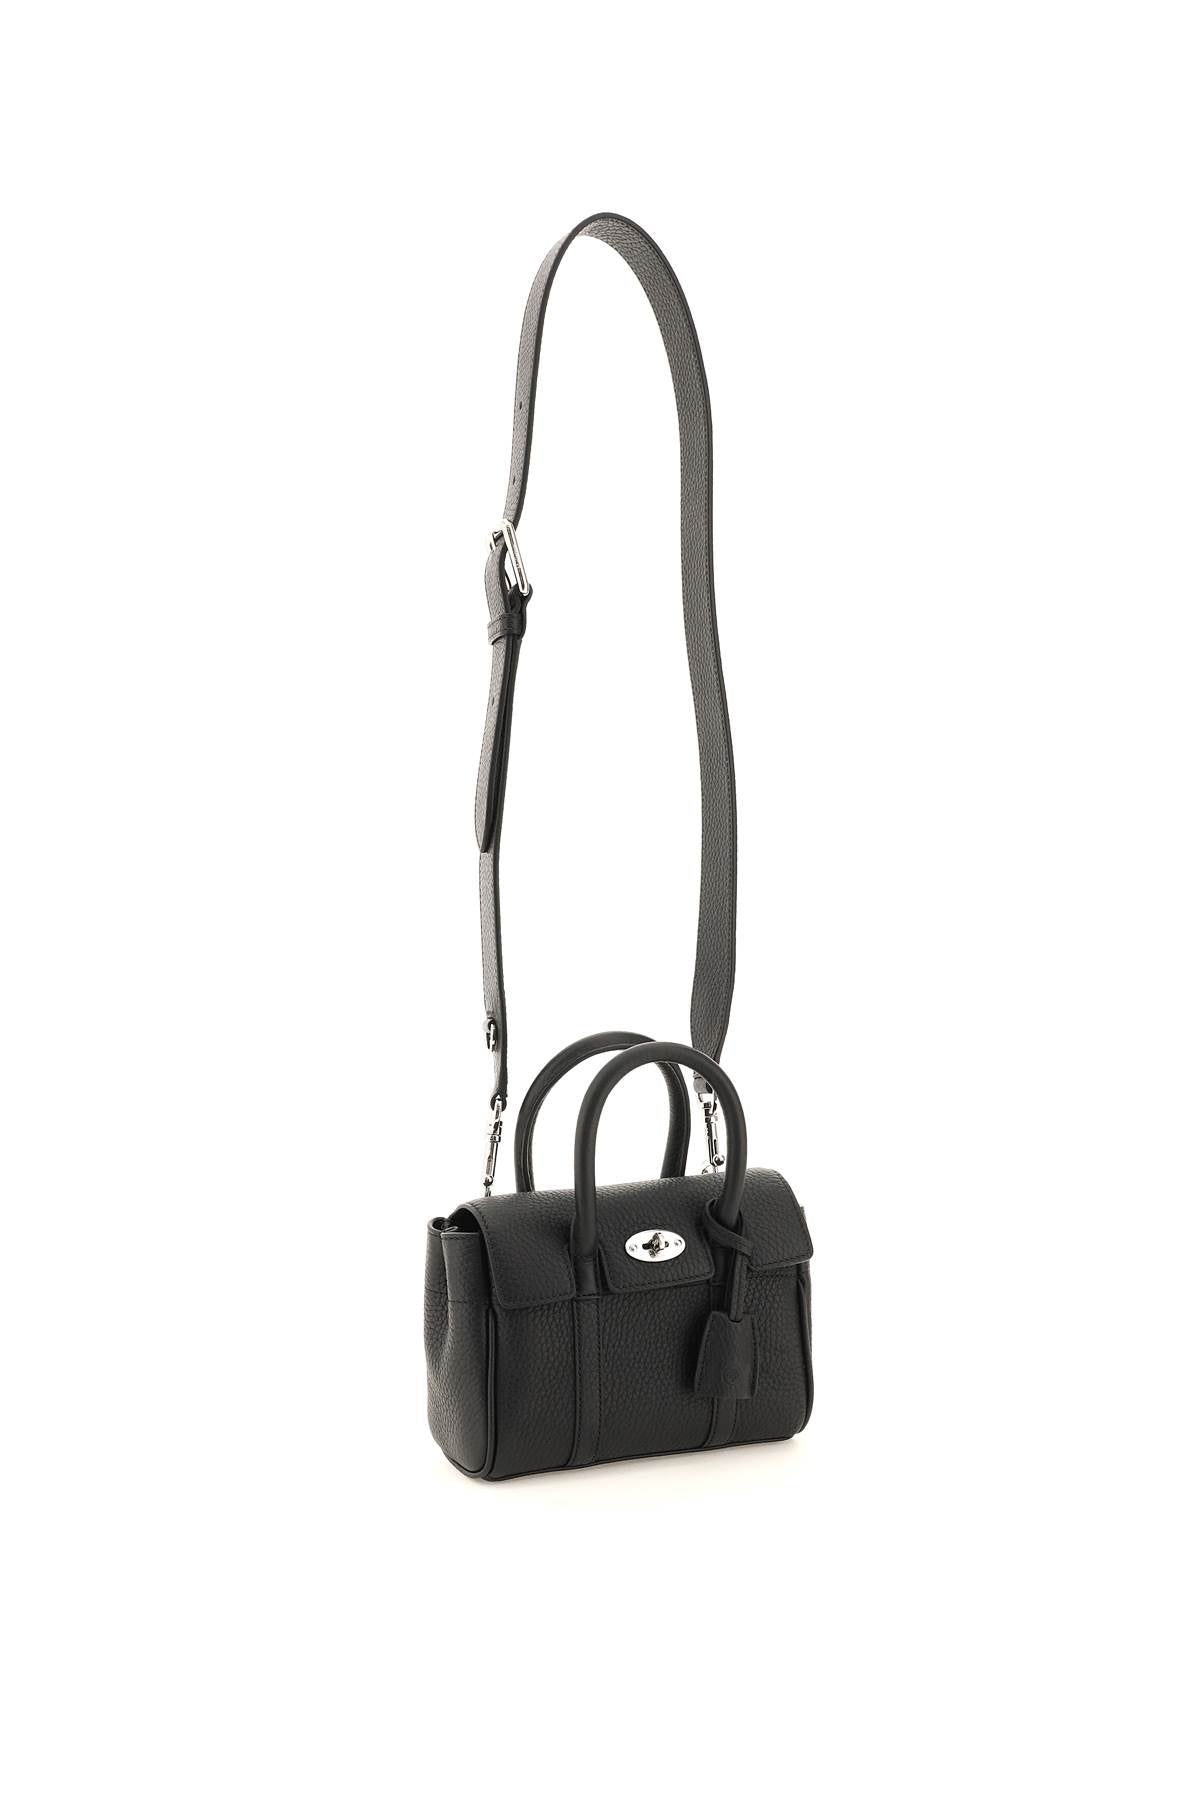 Shop Mulberry Bayswater Mini Handbag For Women In Grained Leather In Black